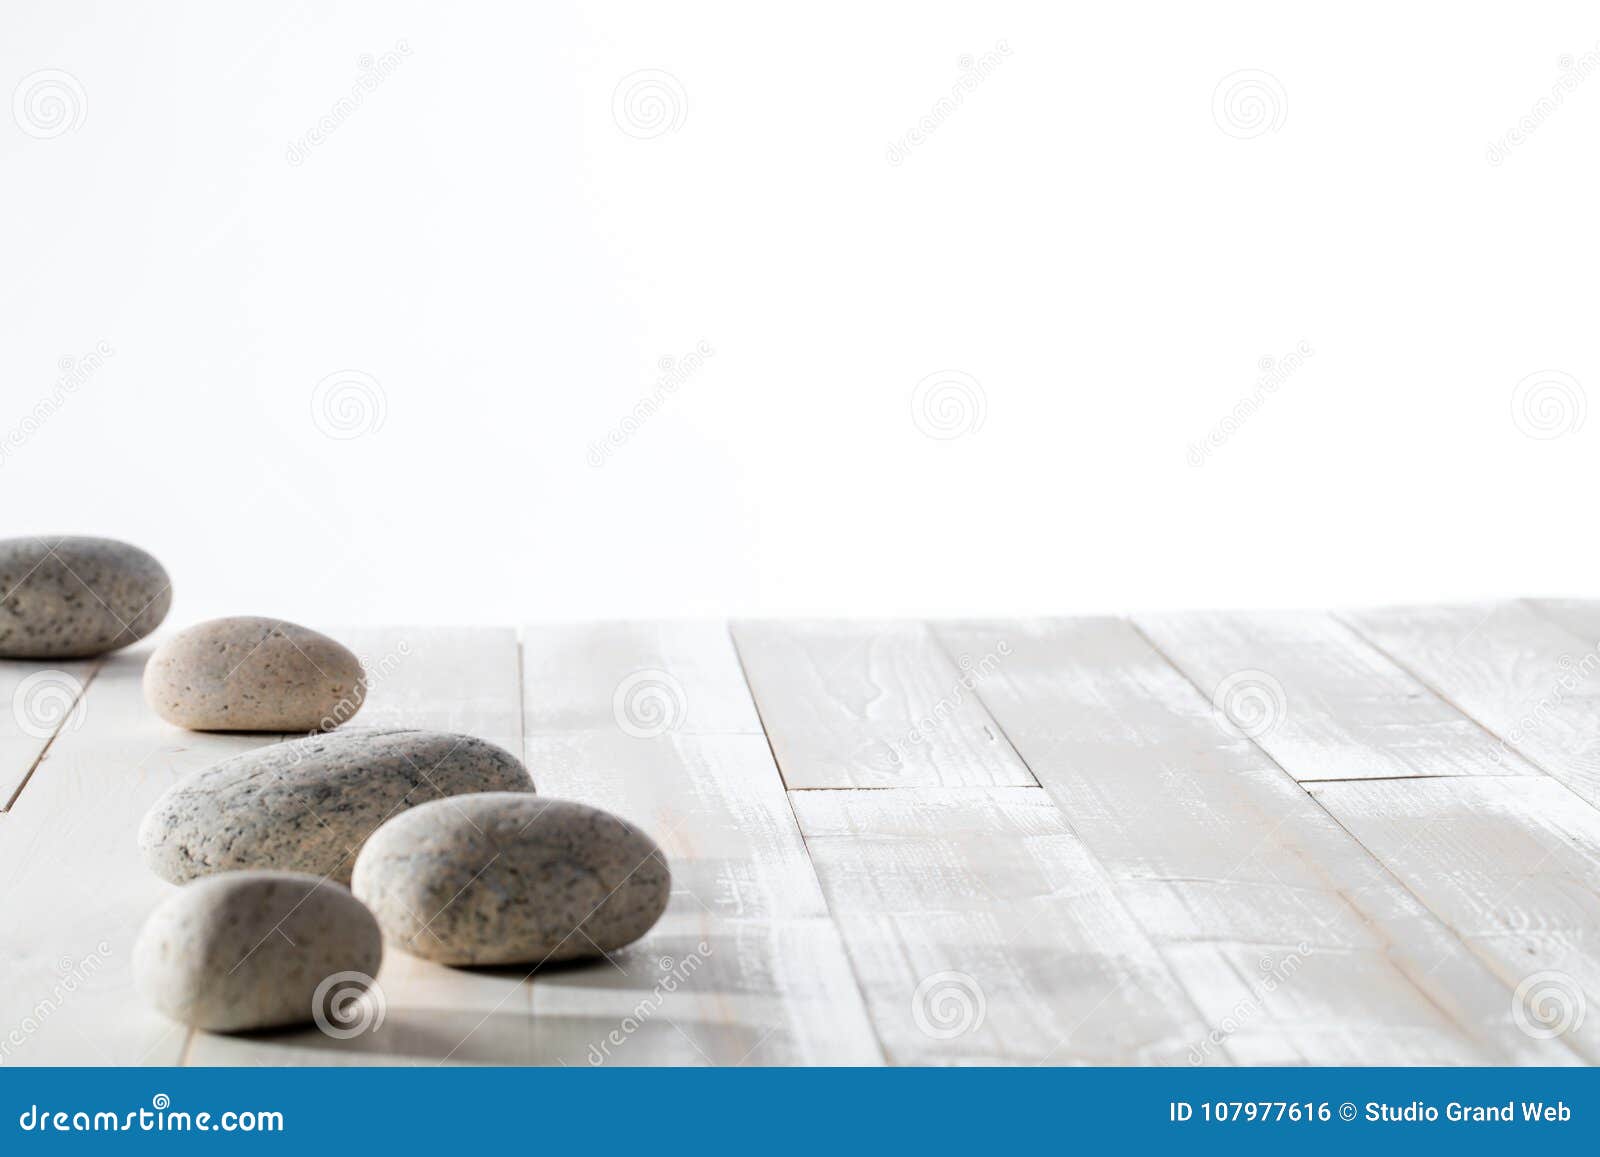 grey pebbles for meditation, mindfulness, mineral spa or white emptiness